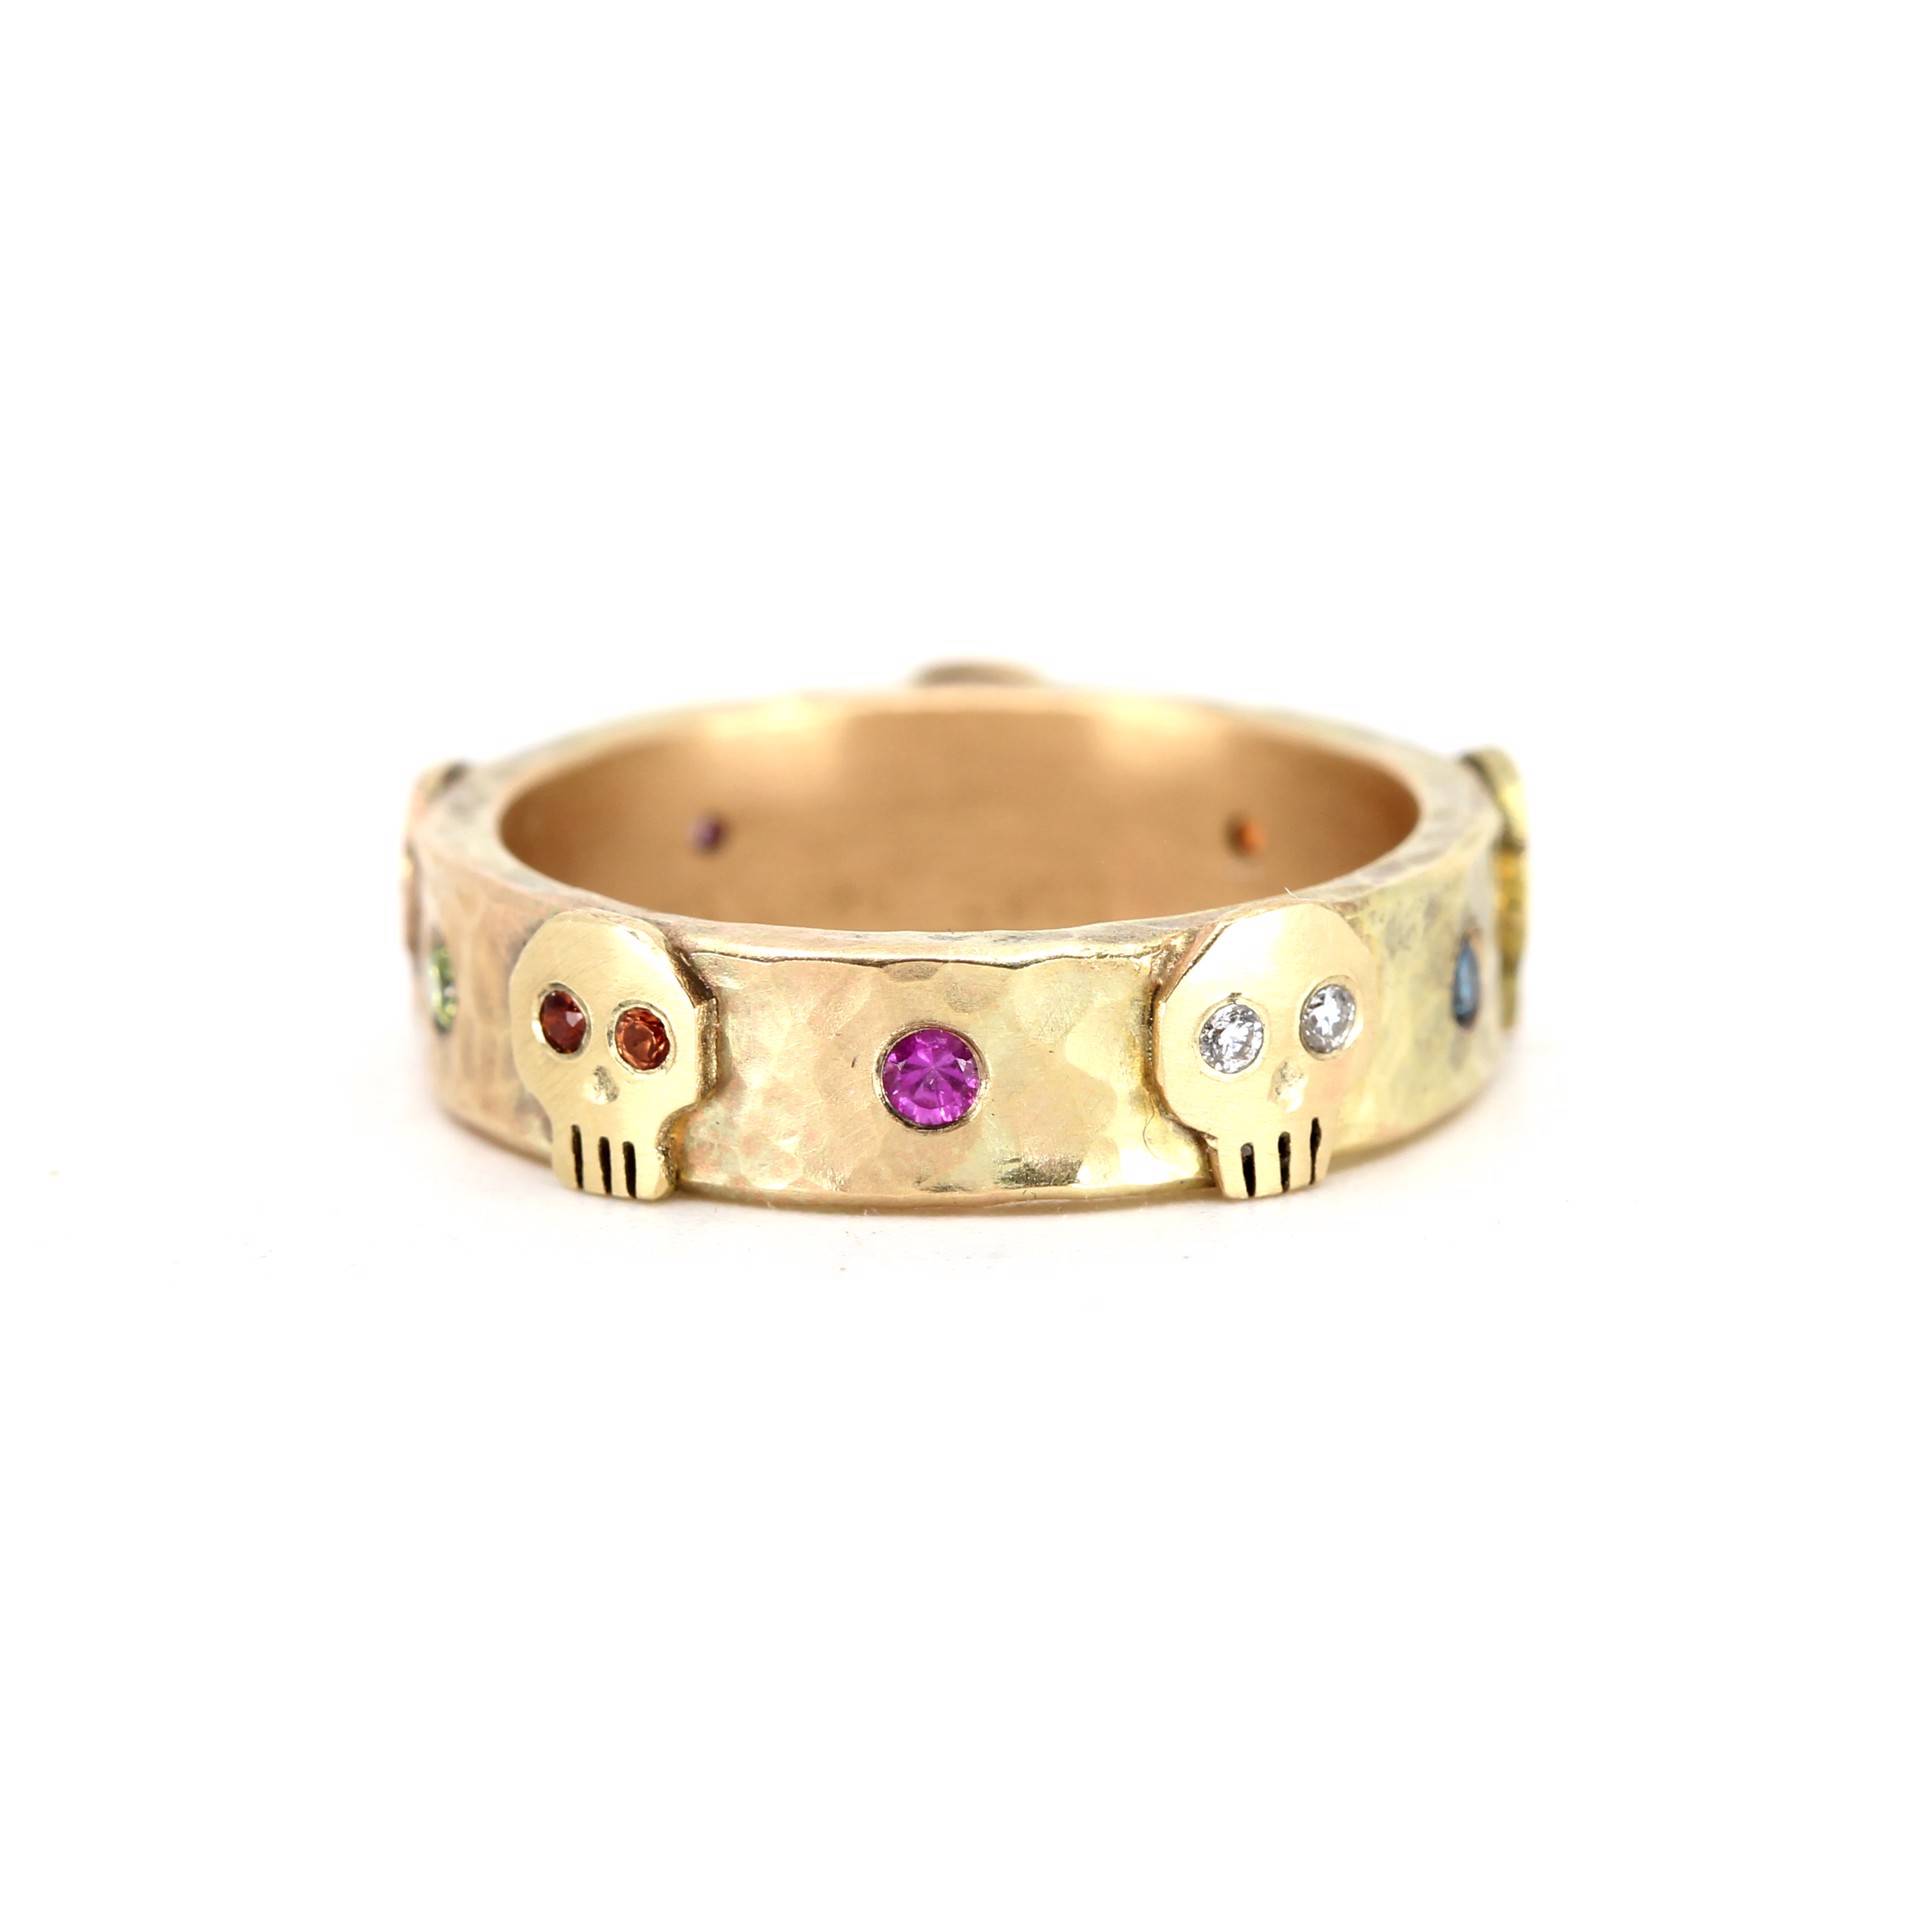 5-Skull Ring (Size 6.5+) by Susan Elnora